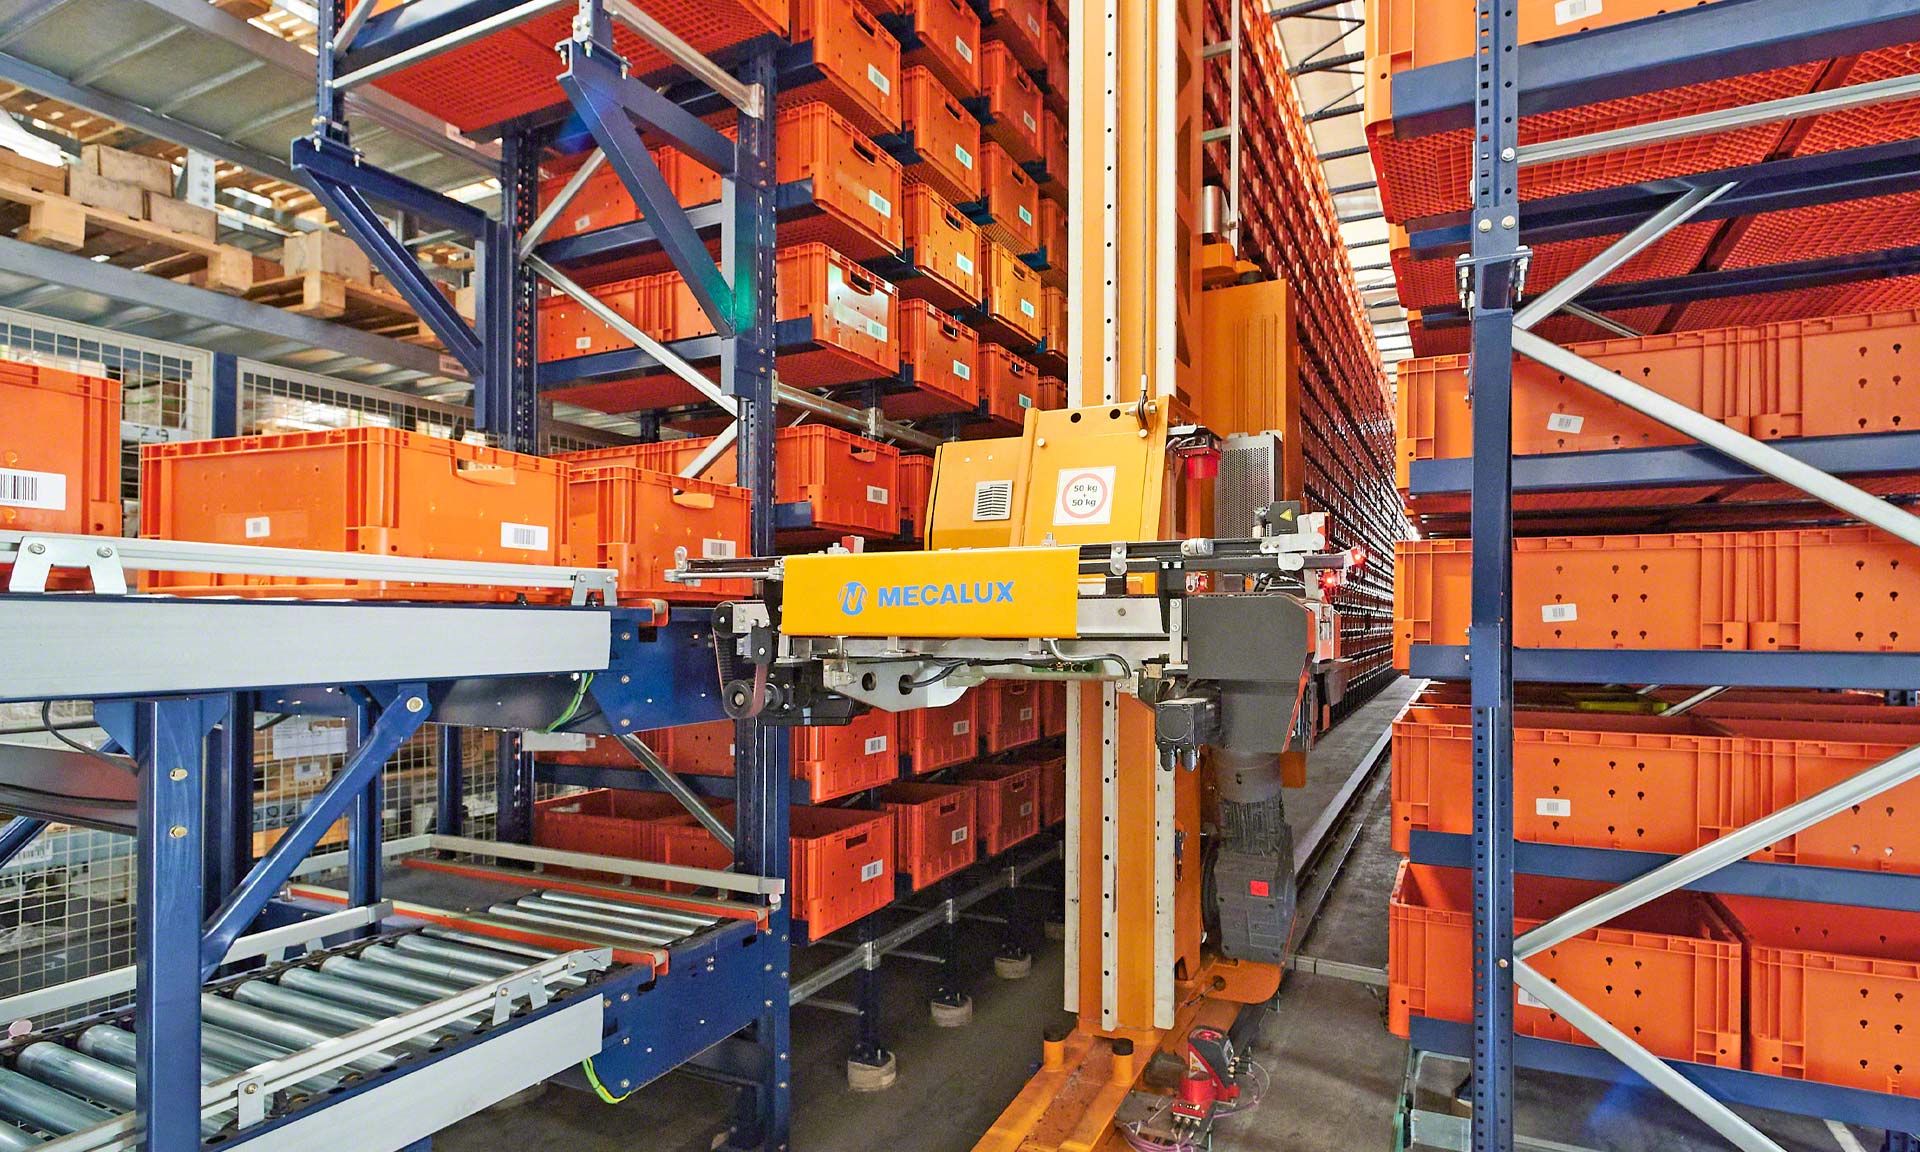 Automated warehouse of screw distributor ICF in Varese, Italy